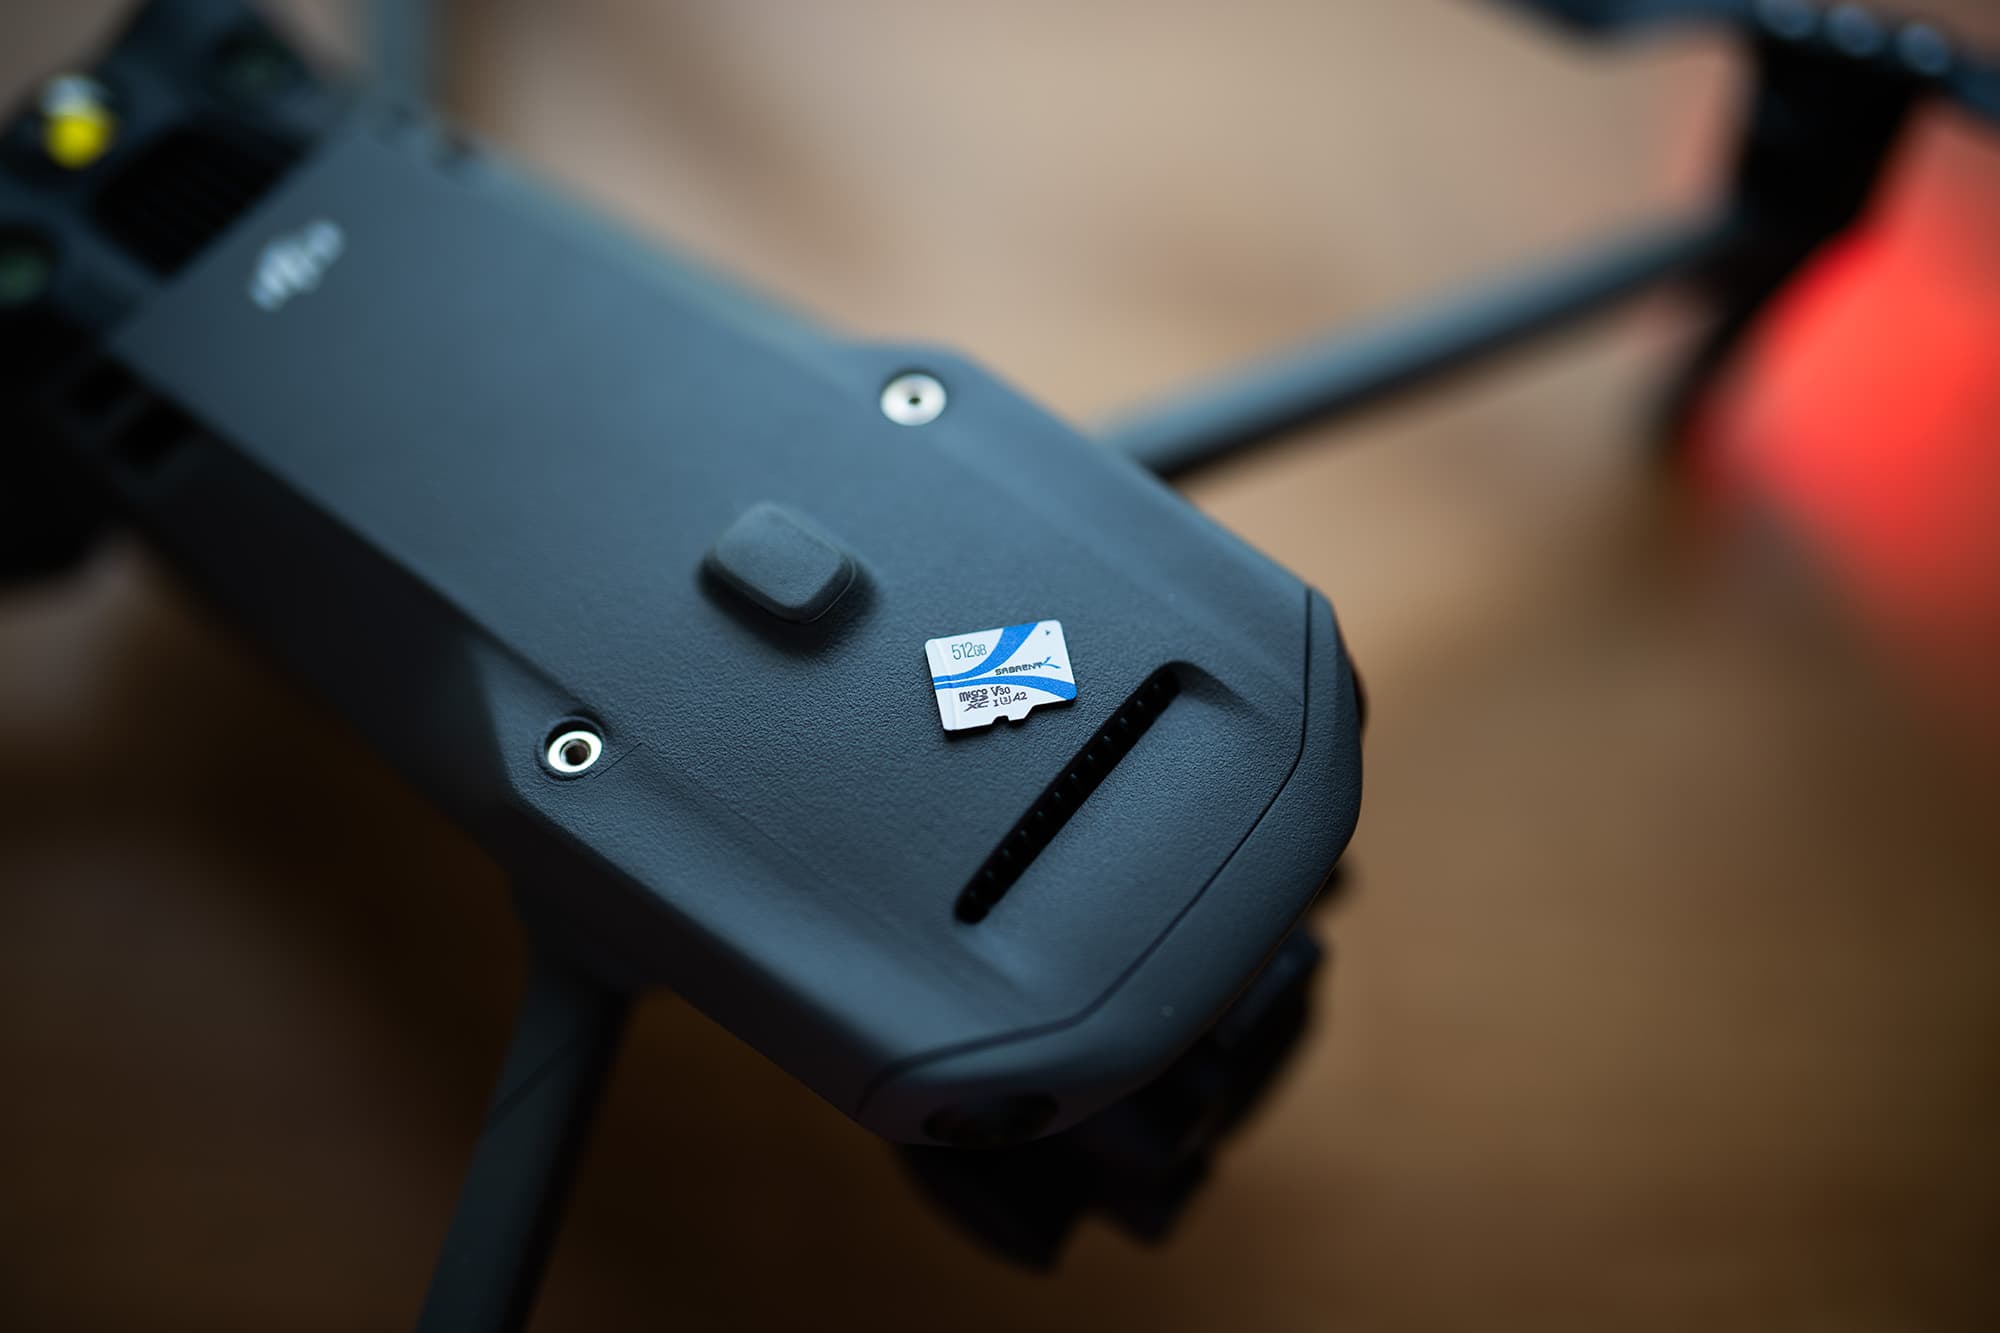 Sabrent’s Rocket V30 A2 microSDXC cards are the perfect match for drone and camera activities